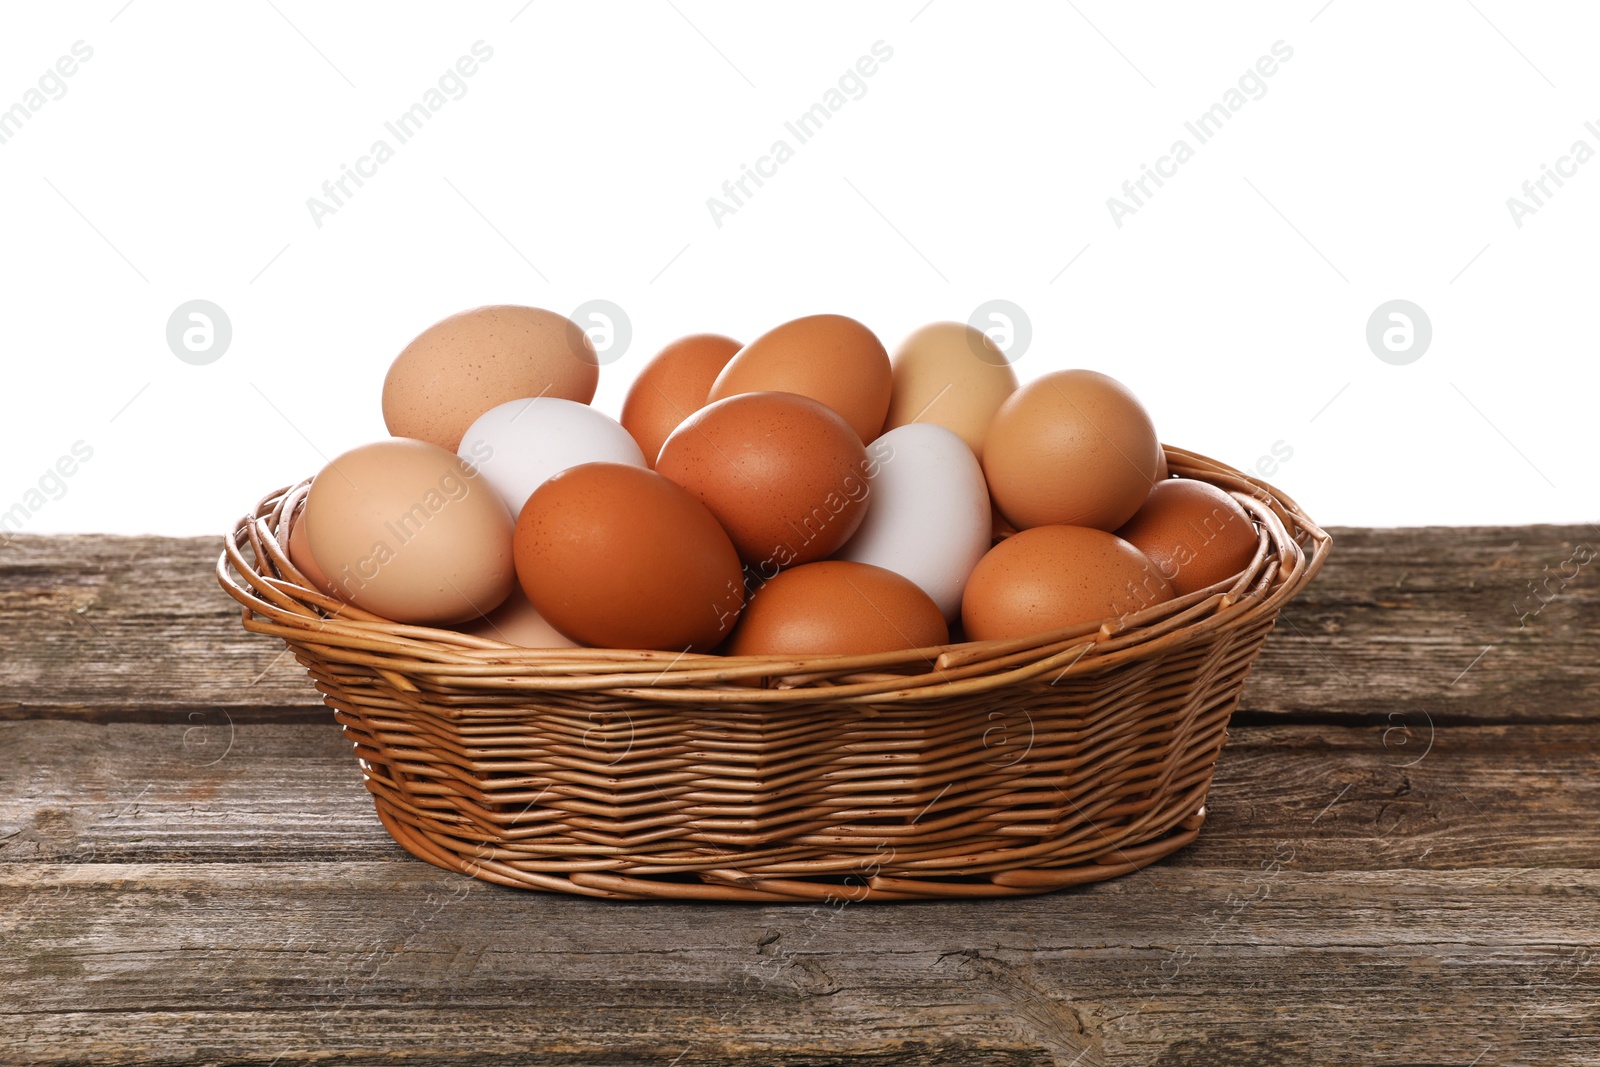 Photo of Fresh chicken eggs in wicker basket on wooden table against white background